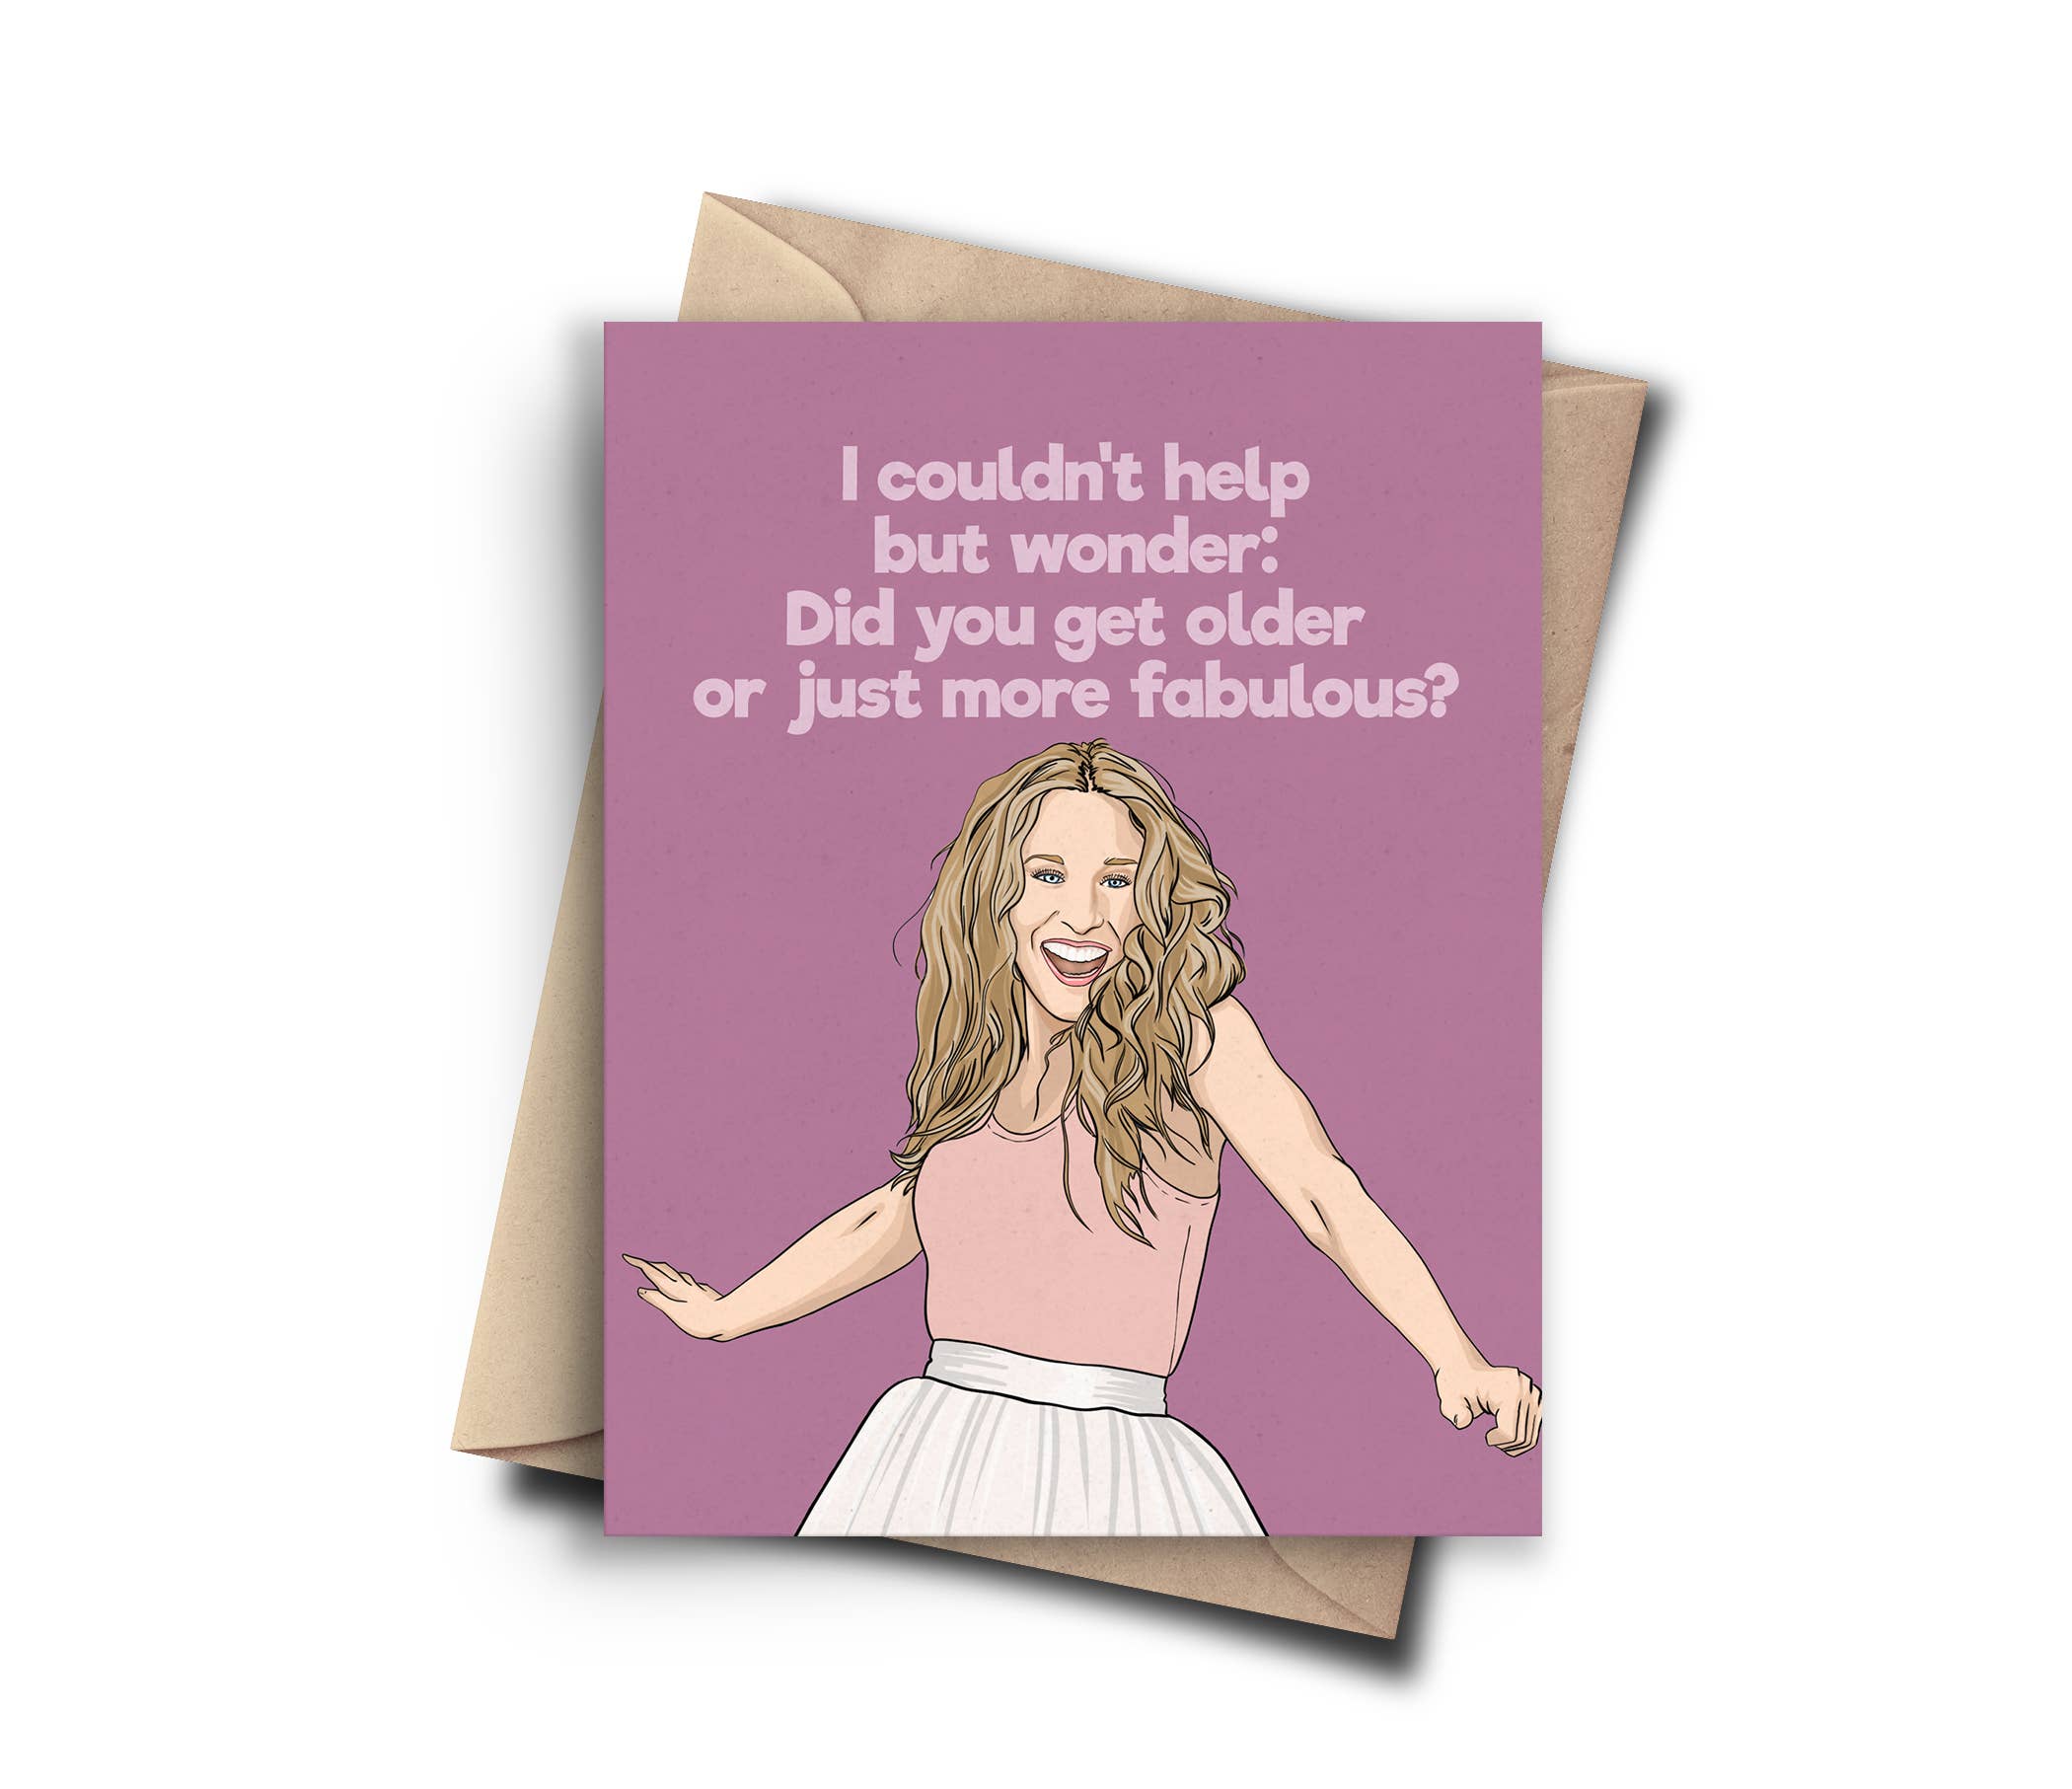 Pop Cult Paper - Sex and the City Carrie Bradshaw Funny Birthday Card